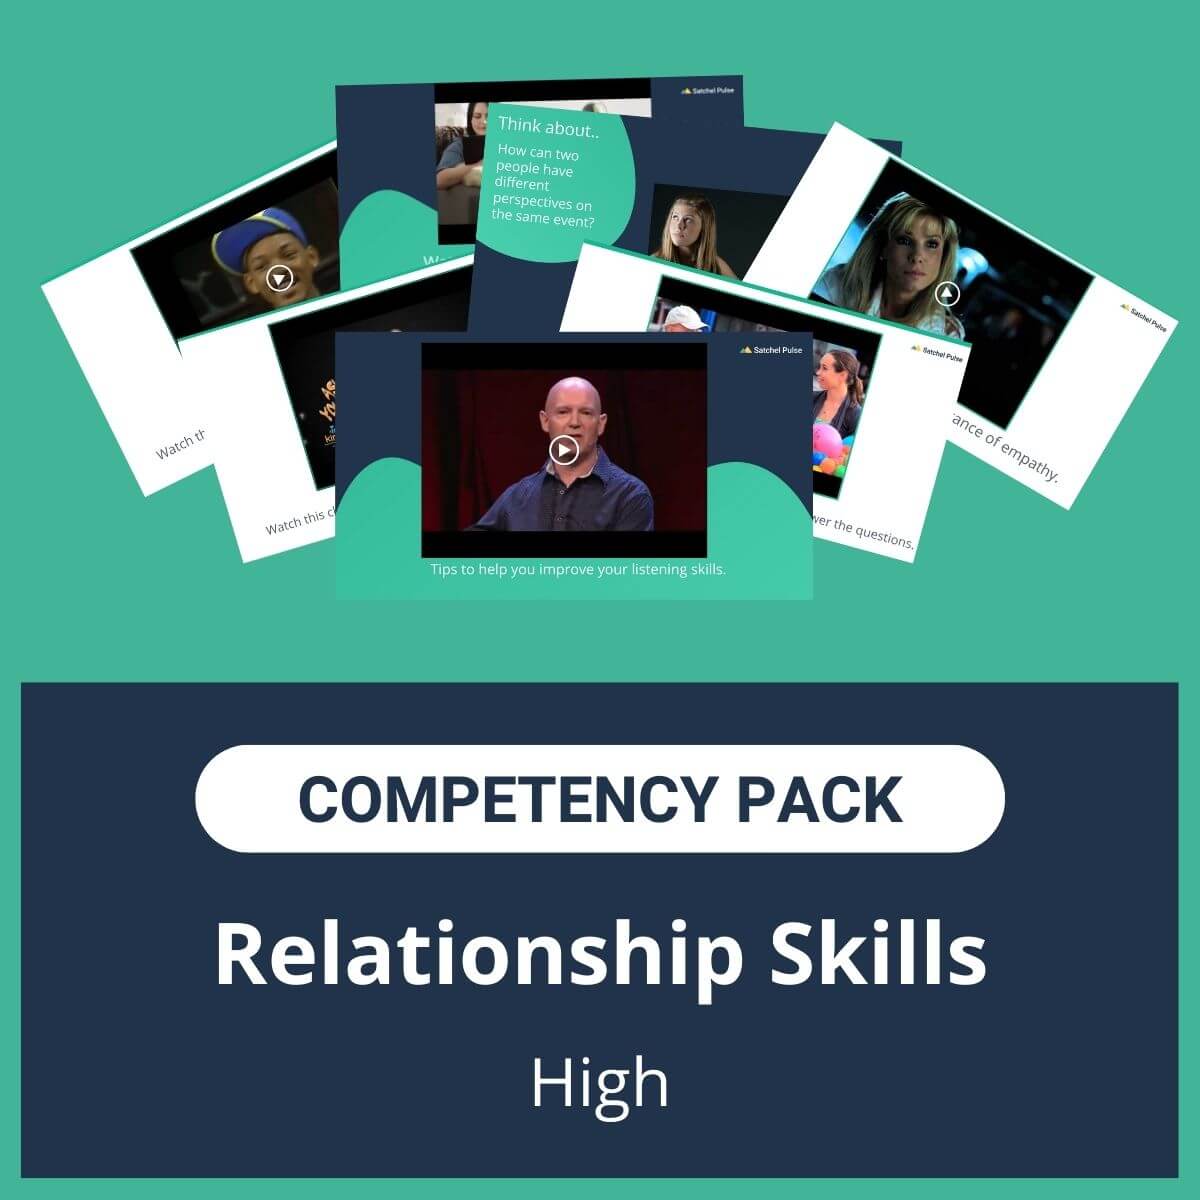 This SEL Resource pack for "Relationship Skills" competency includes a range of SEL activities such as SEL lessons and self-studies